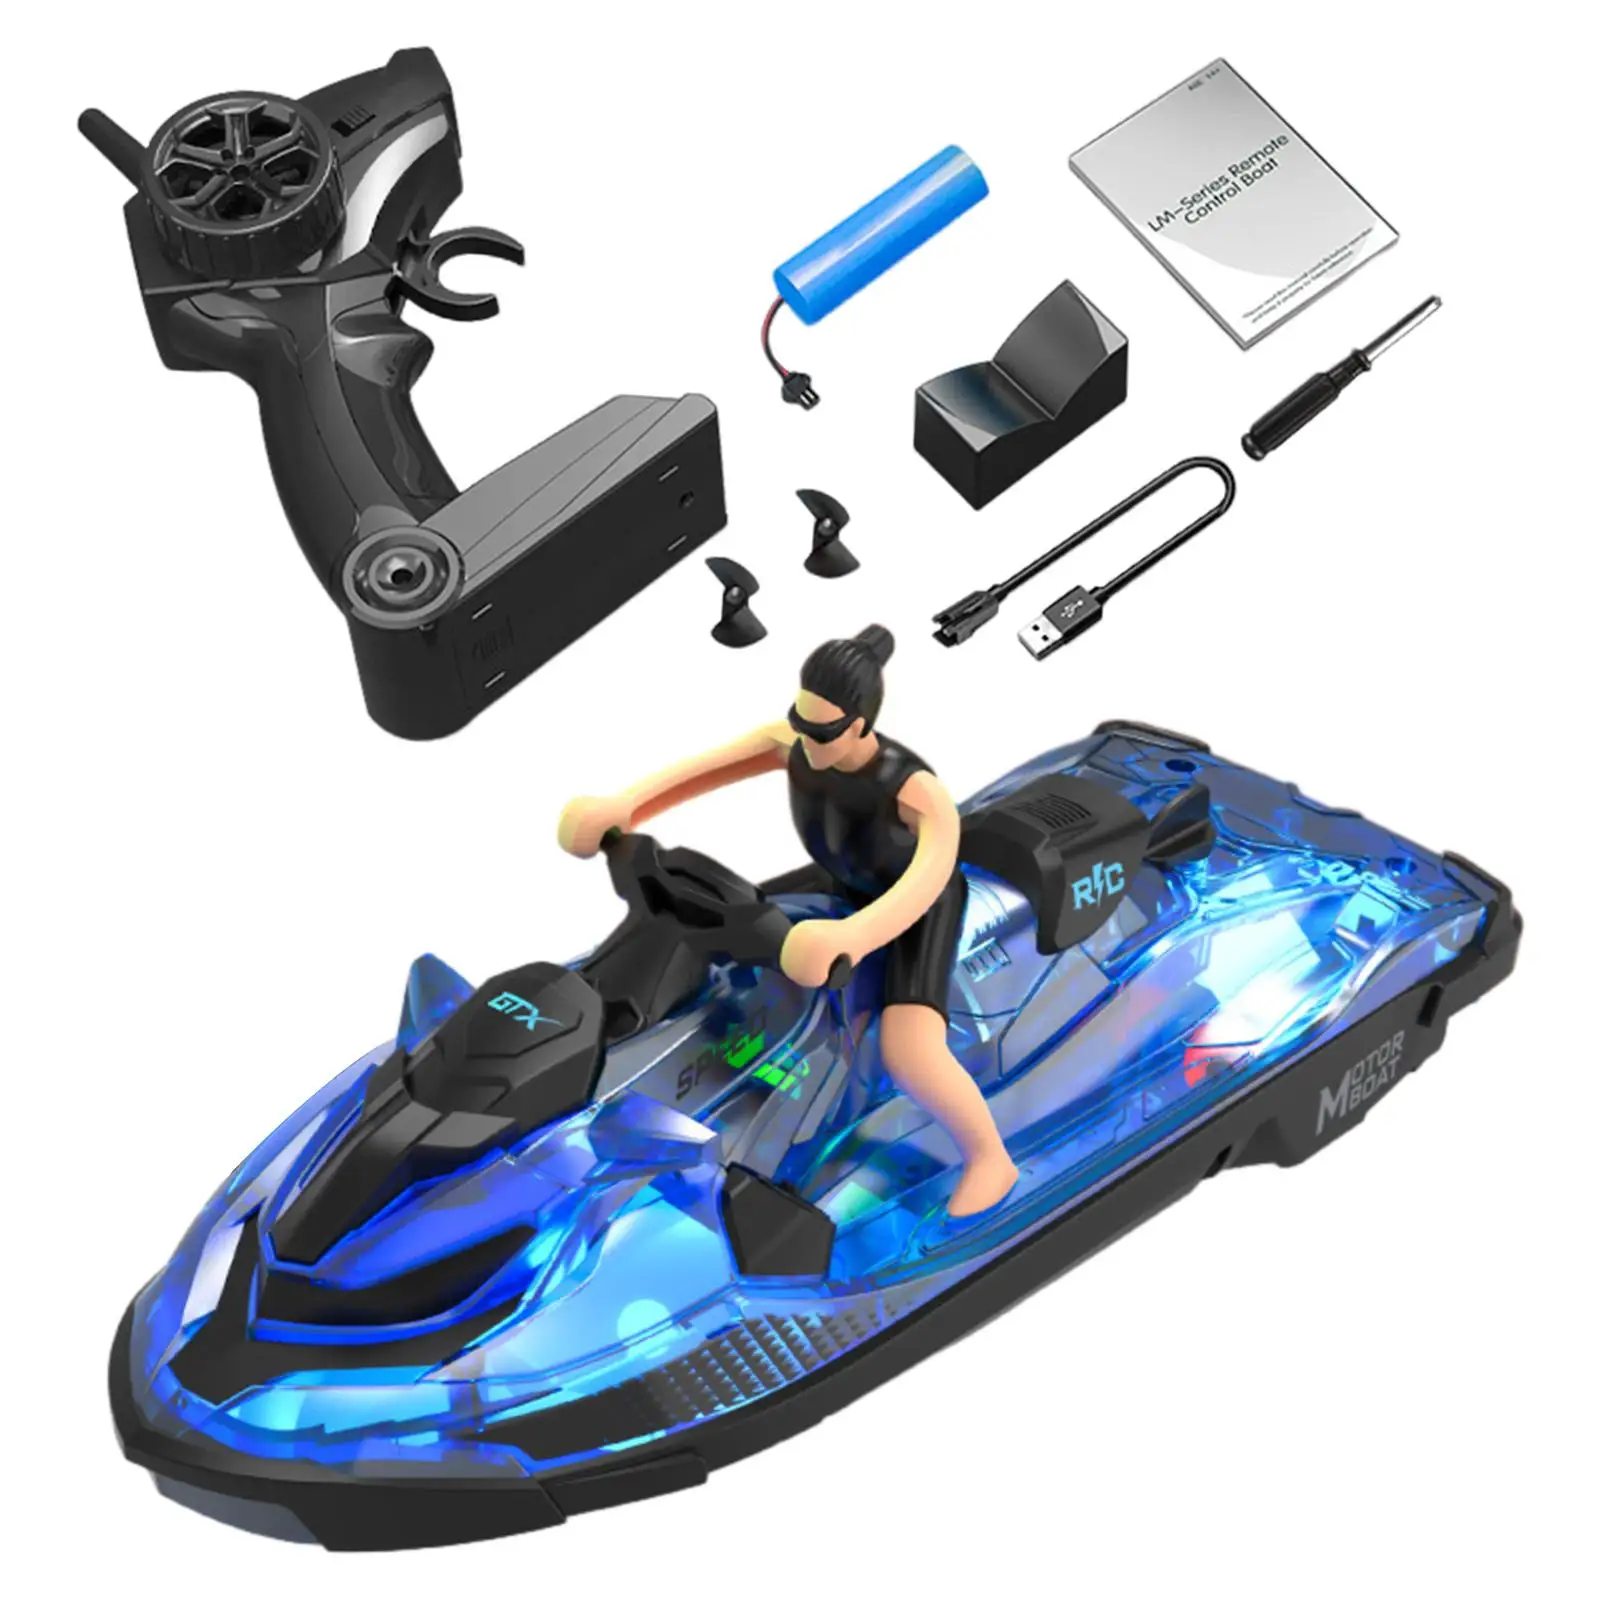 RC Speed Boat with Light 2 Gears Speed Adjustment Simulation Fast Remote Control Boat for Adults Kids Boys Girls Birthday Gifts